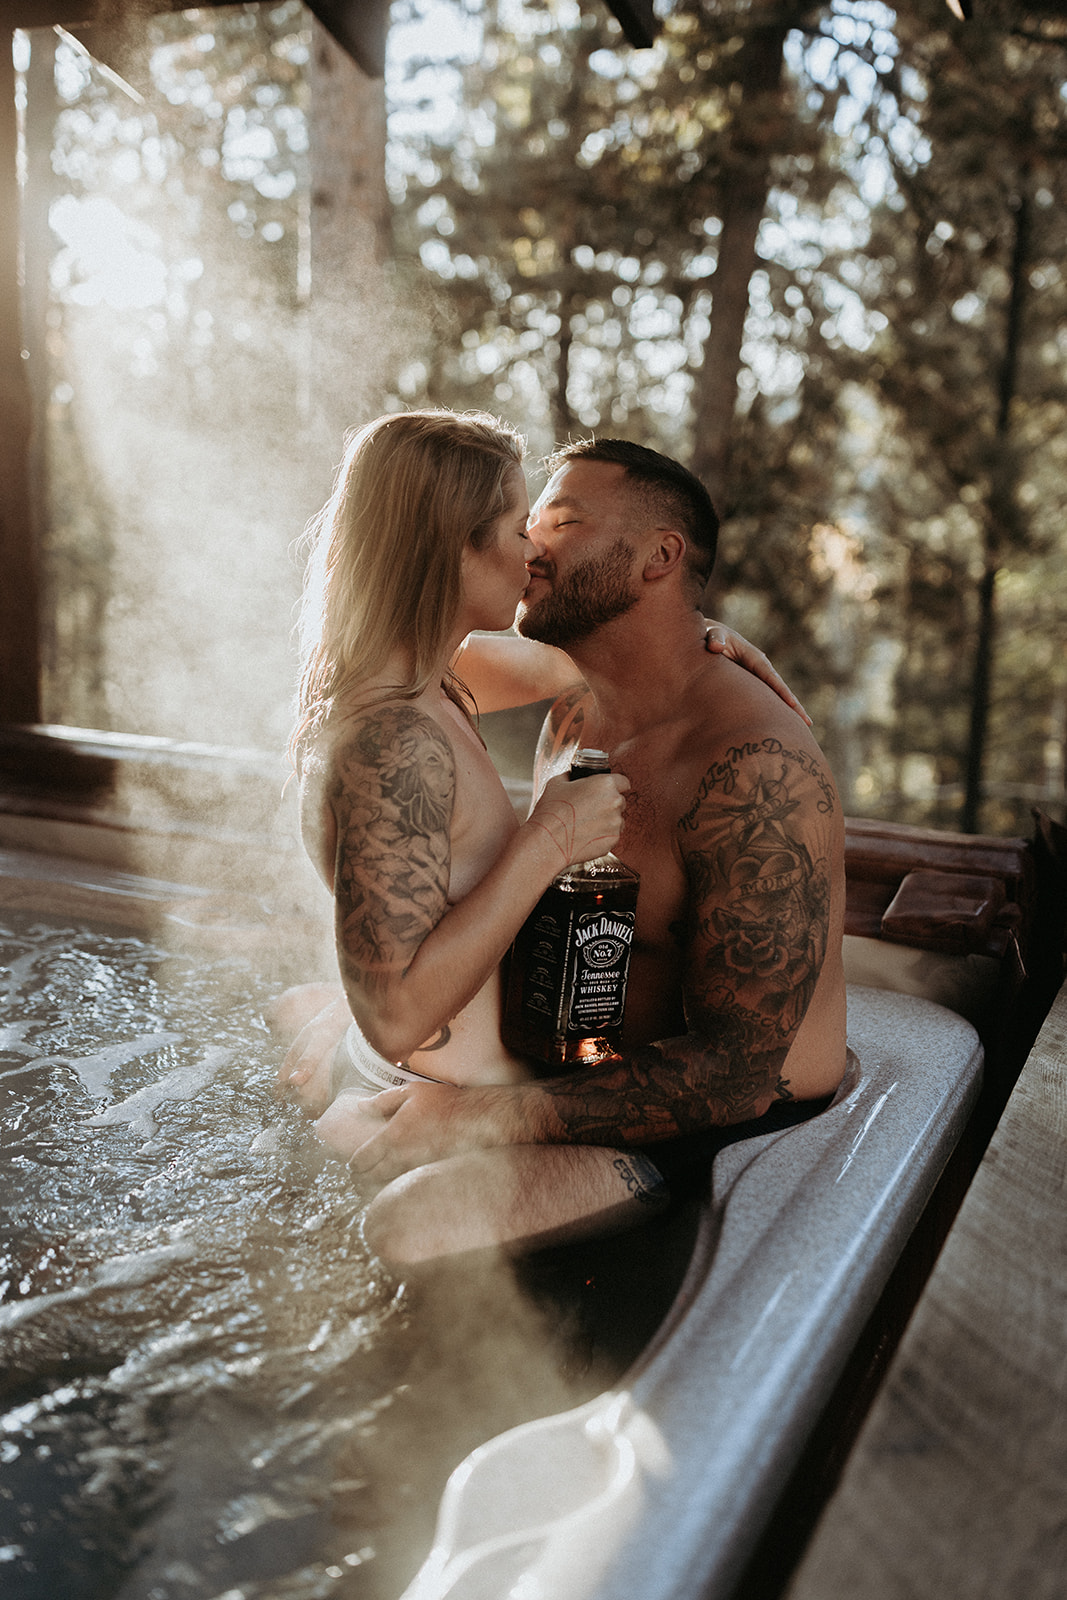 A couple kissing in a hot tub while the girl holds a bottle of Jack Daniel's whiskey.